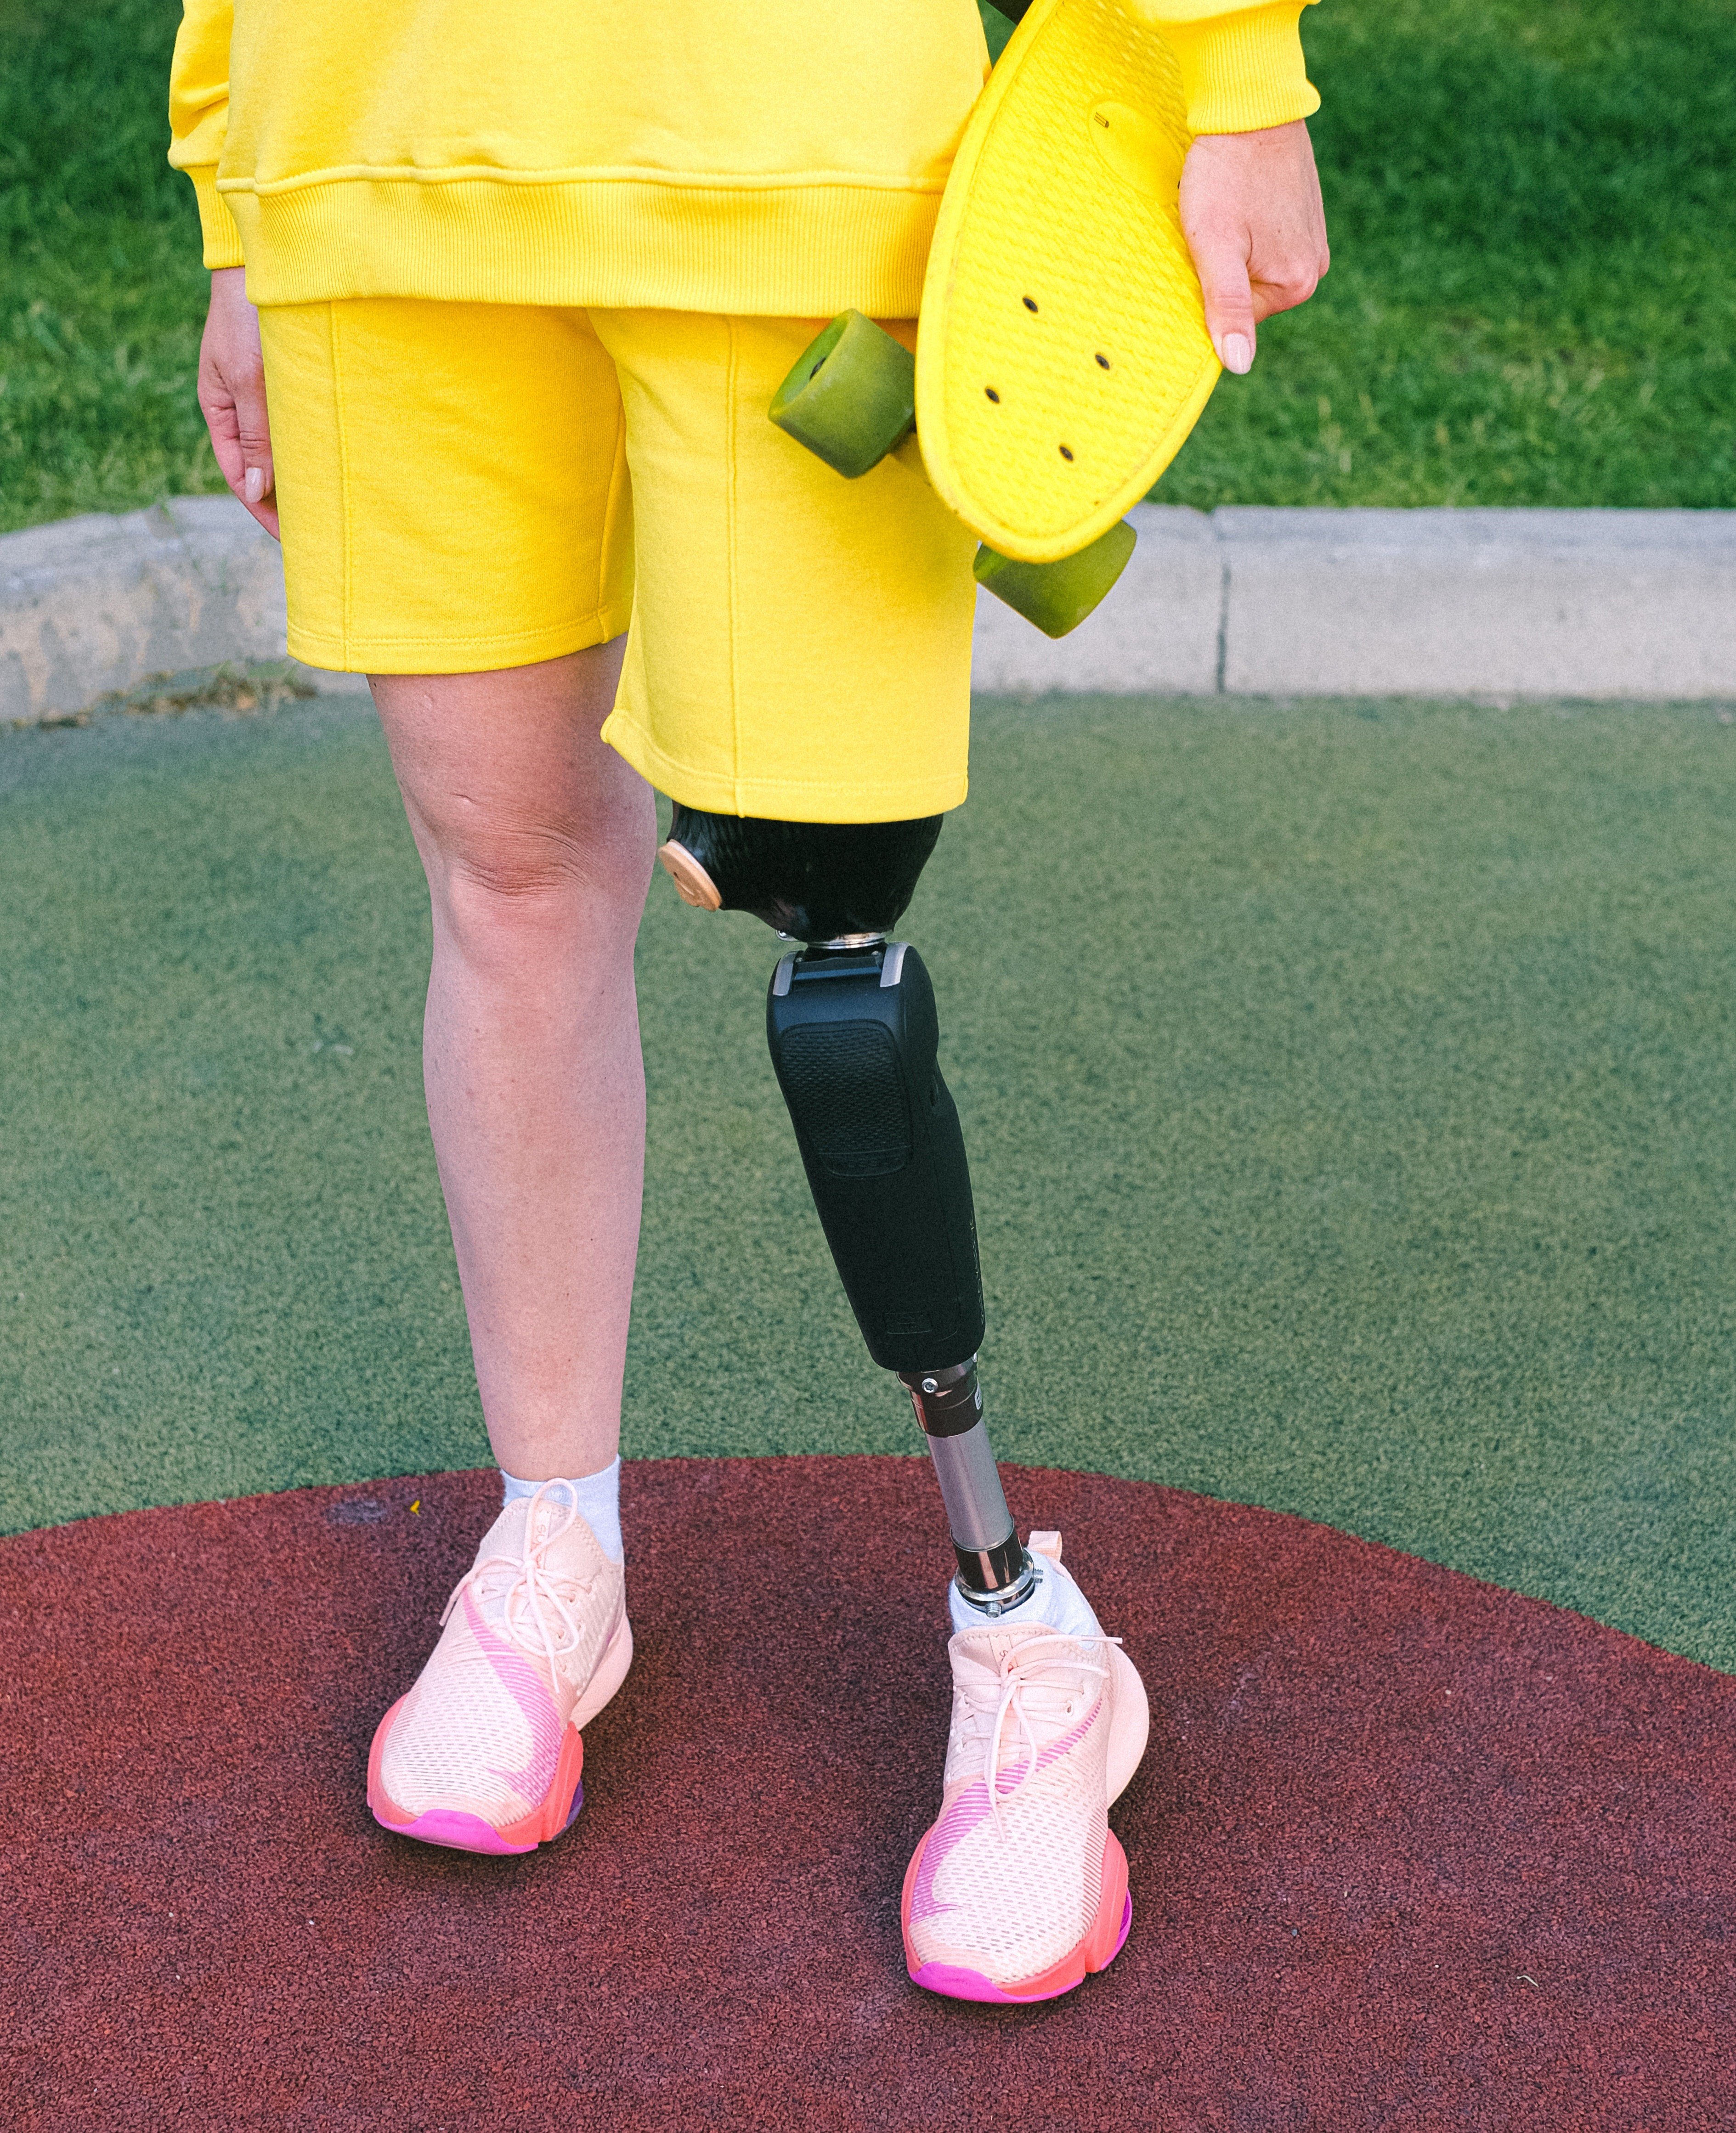 Lucy's parents paid for Heather's new prosthetic. | Source: Pexels